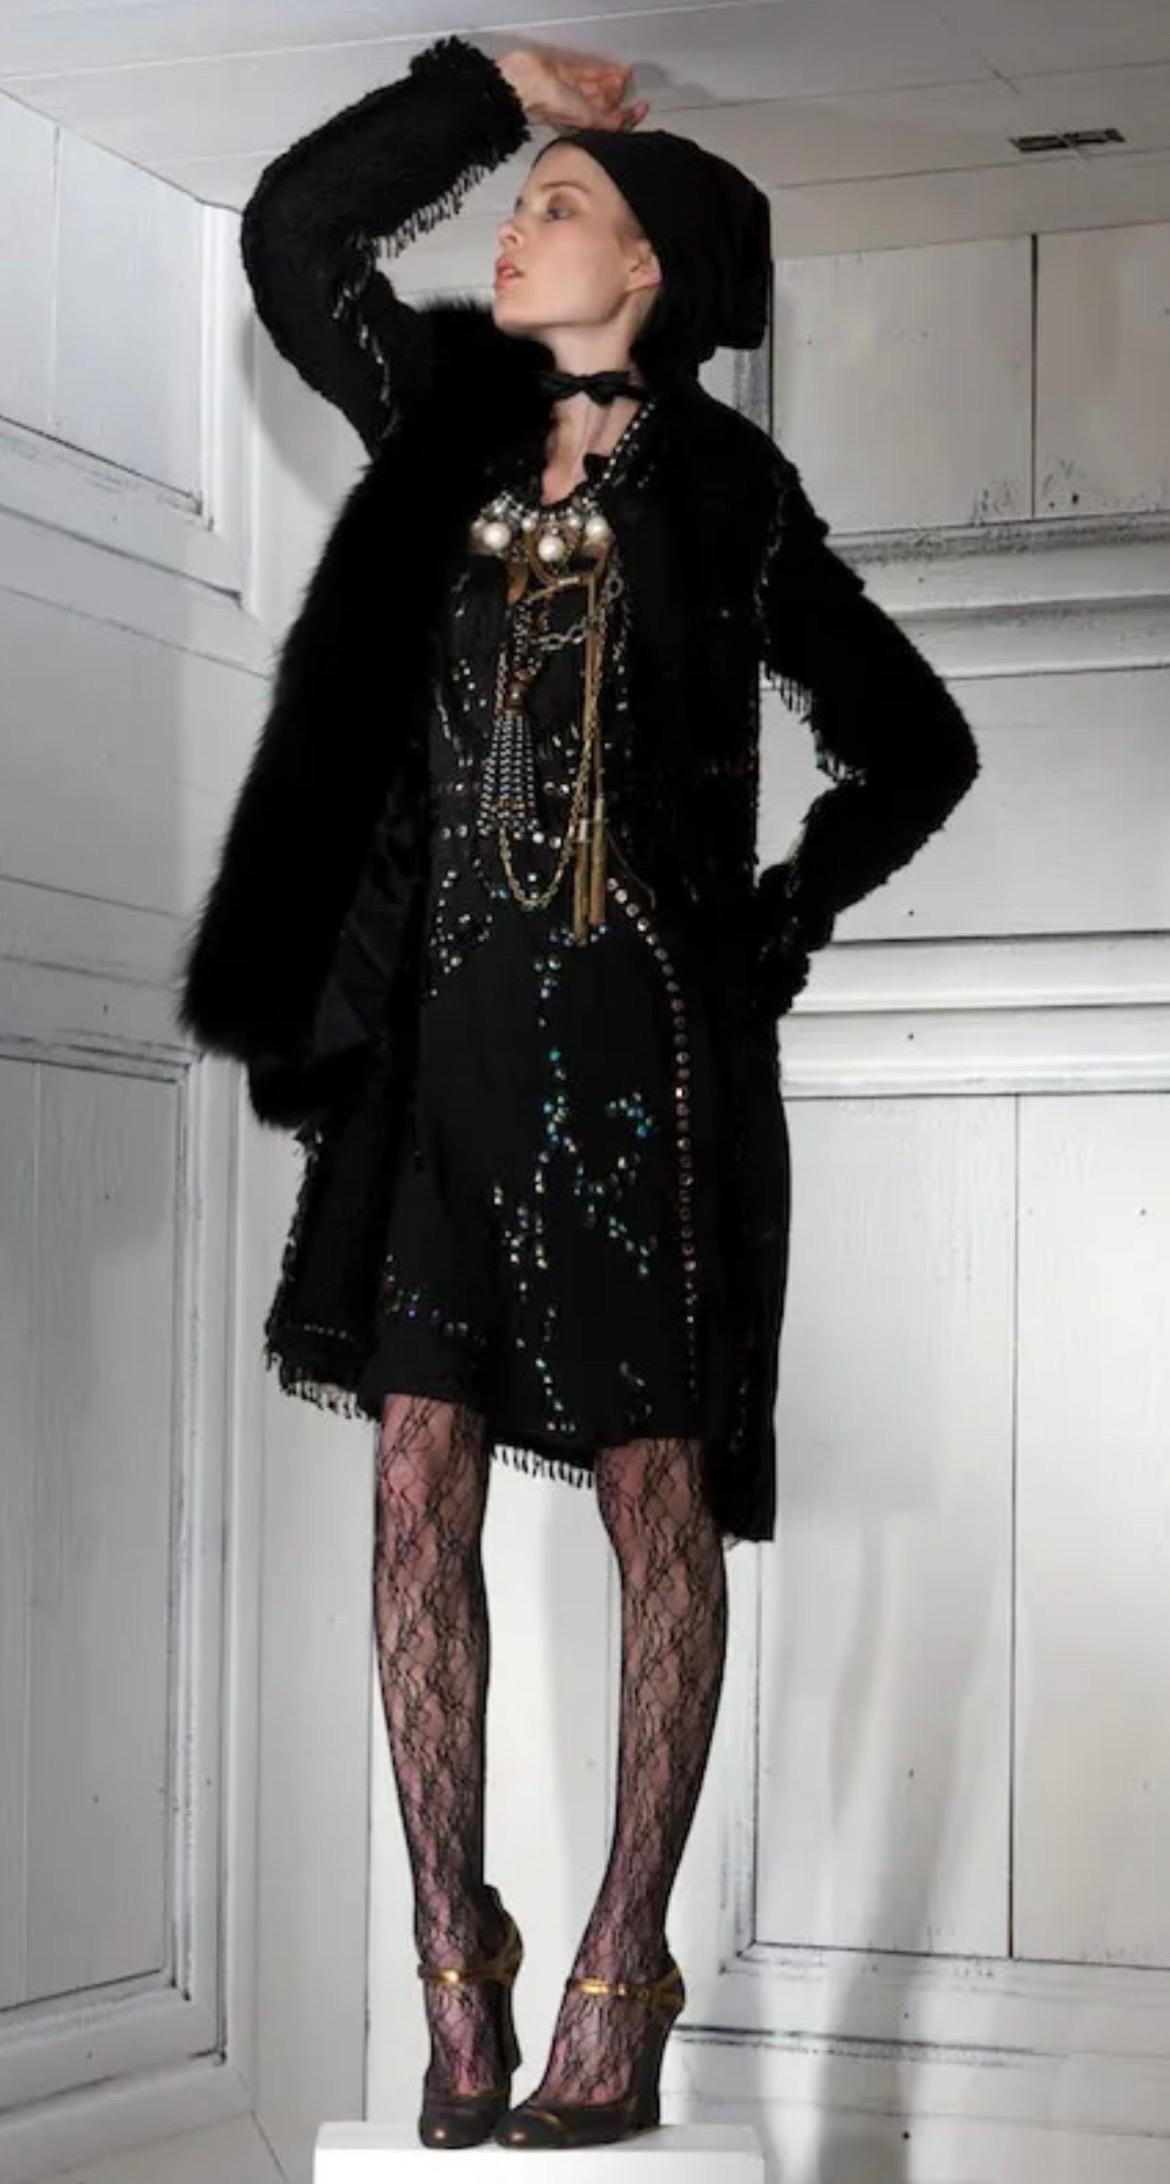 LANVIN
F/W 2010
Cut a super chic silhouette in Lanvin's sophisticated bouclé-tweed coat.
Detailed with intricate metal embellishment.
Metal and sequin embellished, round neck, long sleeves, pockets, raw edge trim.
Concealed snap fastenings through